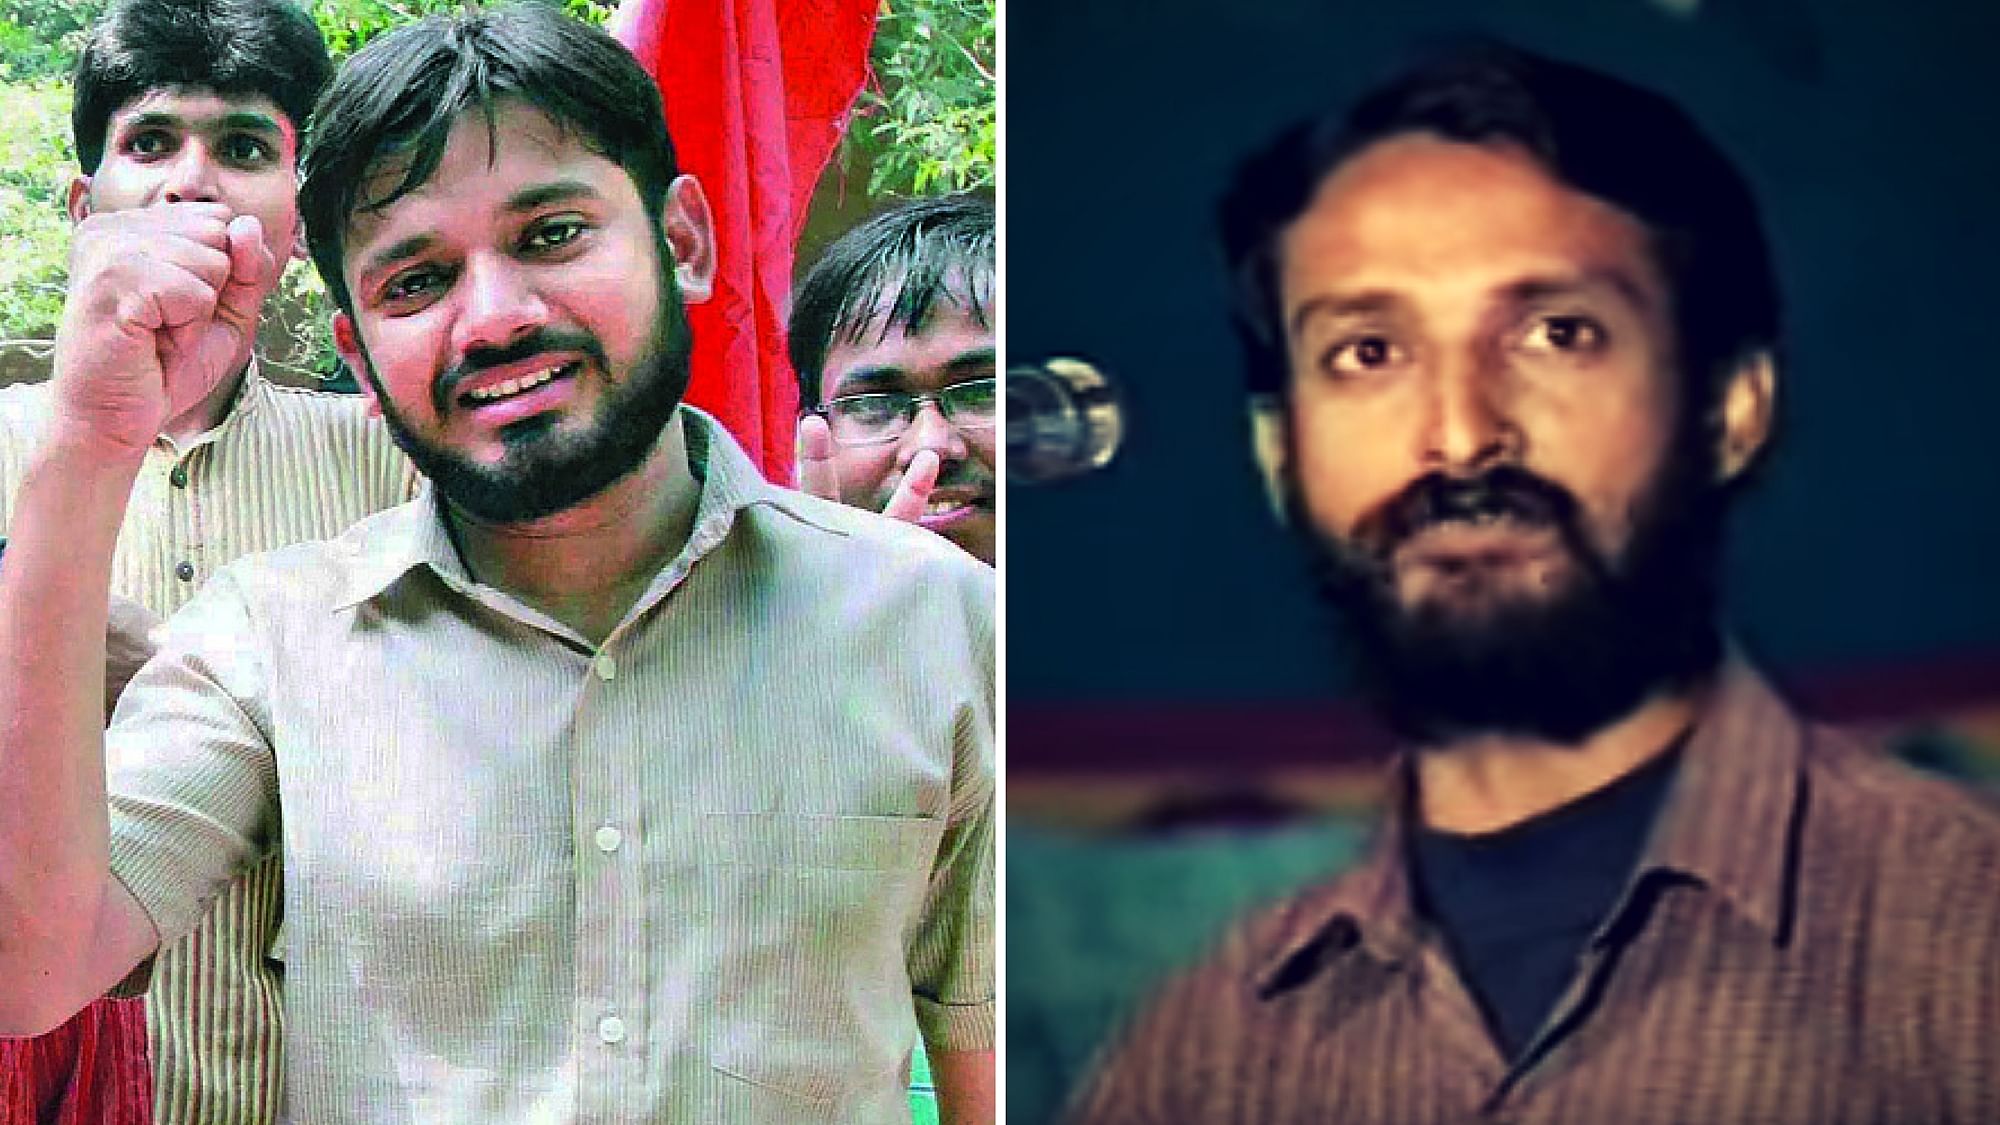 Two JNUSU students who have seen unprecedented protests in their support: Kanhaiya Kumar (L) and Chandrashekhar Prasad who was killed in 1997. (Photo Courtesy: Facebook; YouTube Screenshot)